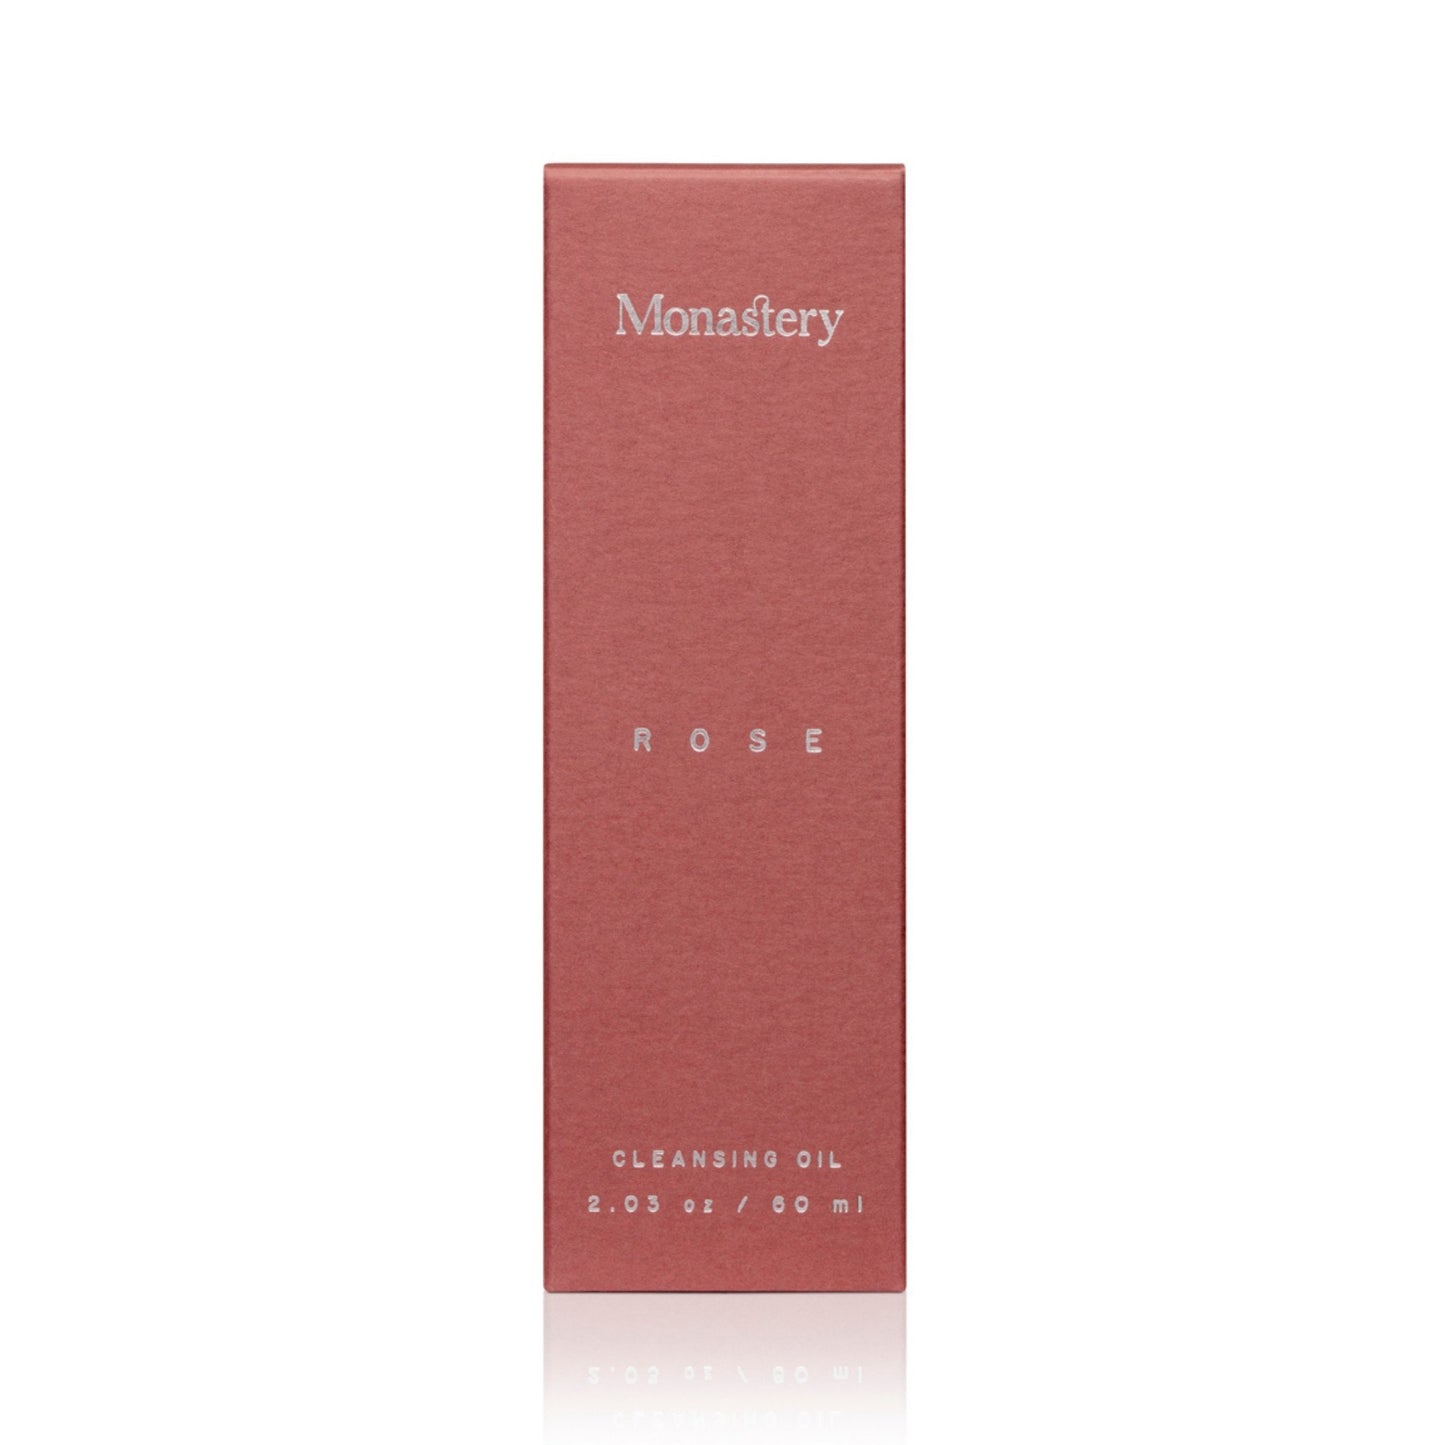 Monastery ROSE Cleansing Oil - The Slow ClinicFace